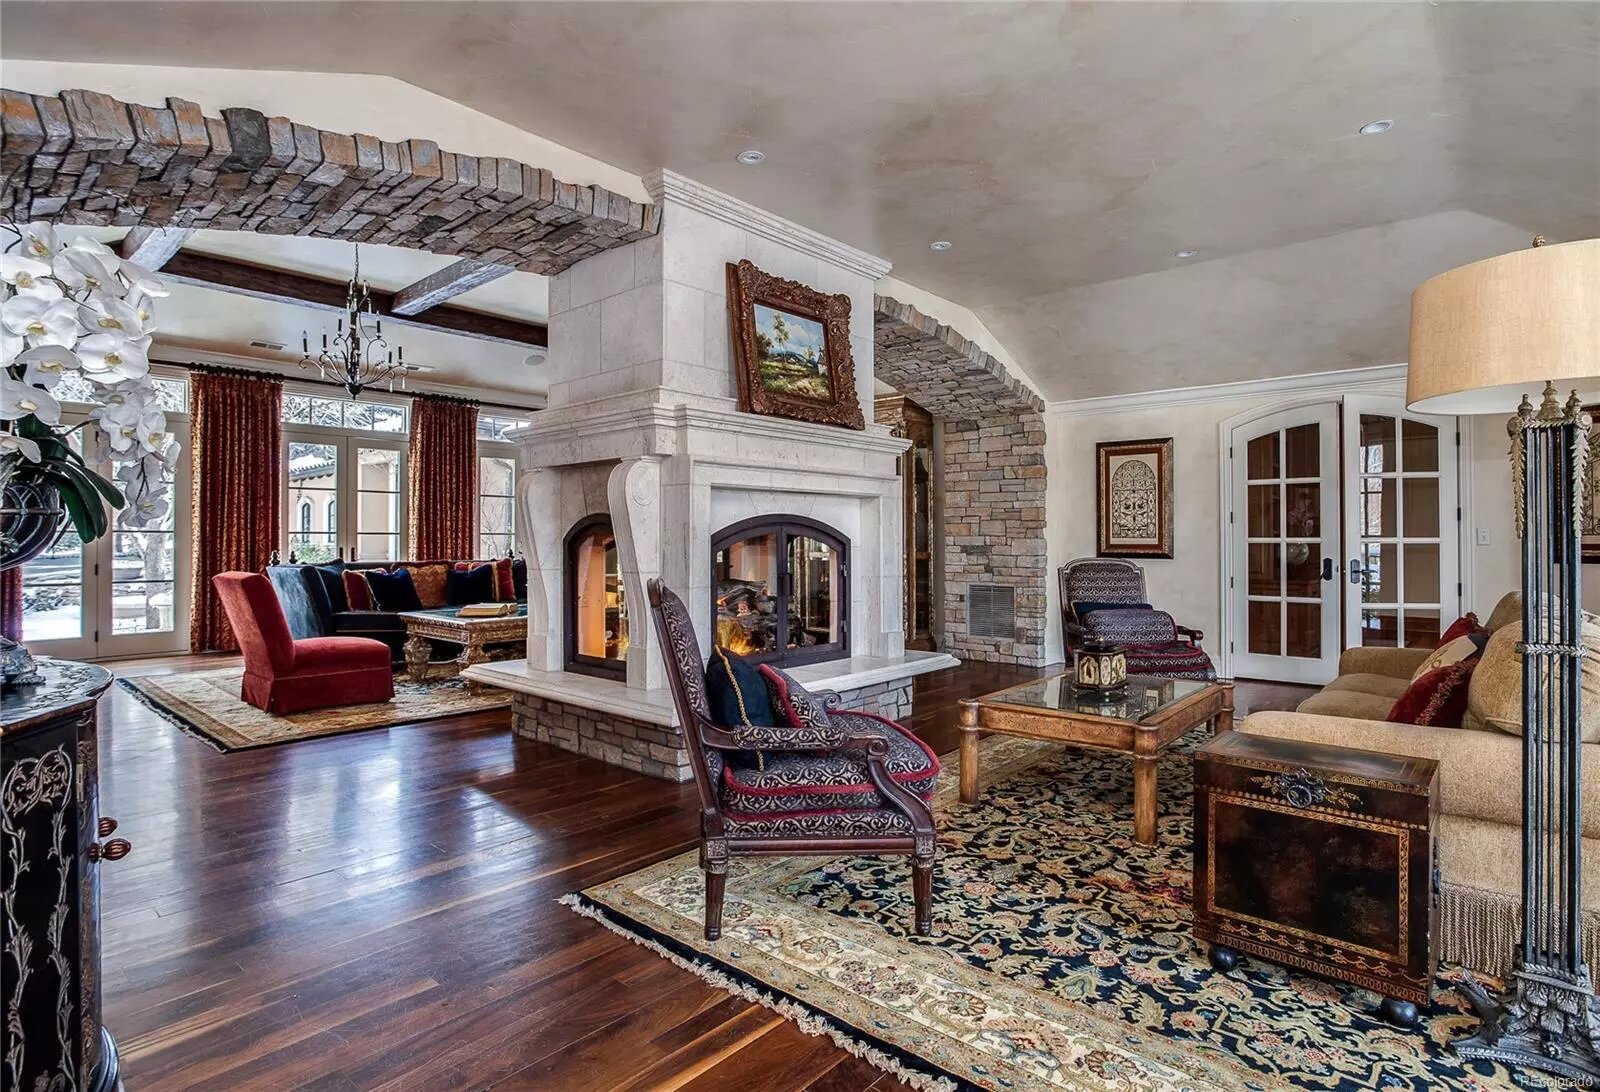 John Elway's ex-wife puts Belcaro mansion on the market for $4.5M